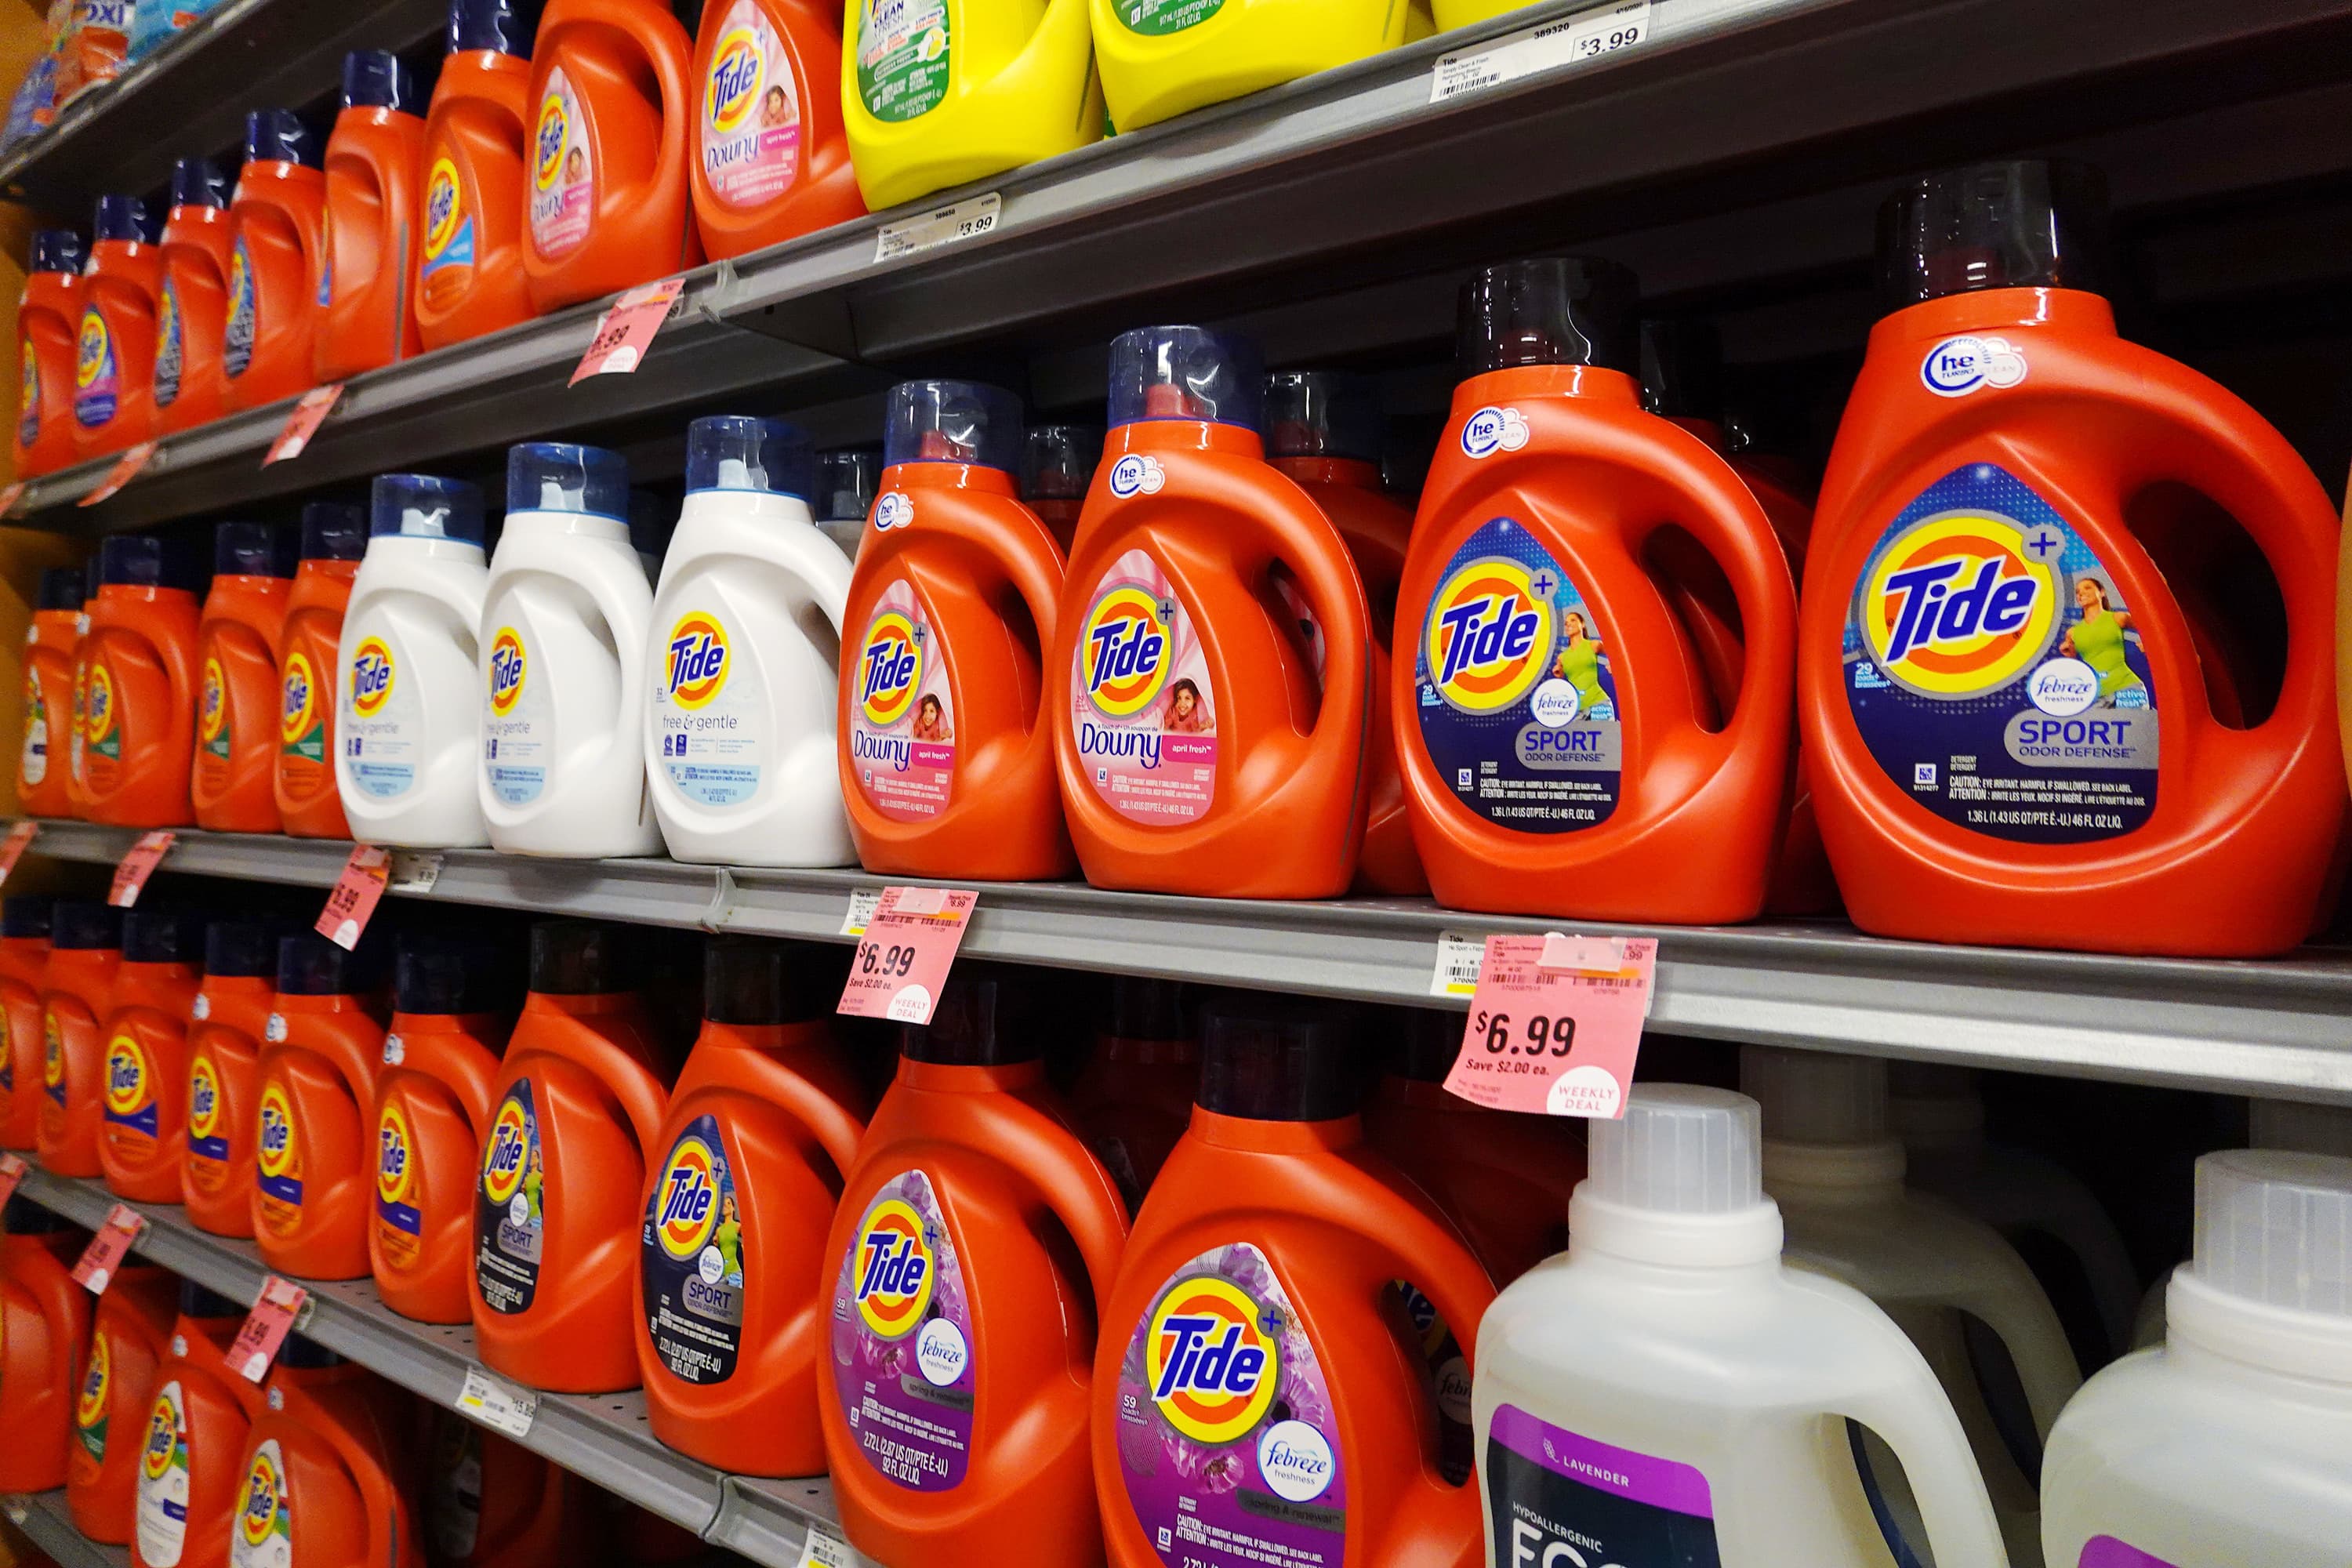 Procter & Gamble is planning several price increases for Tide and other products